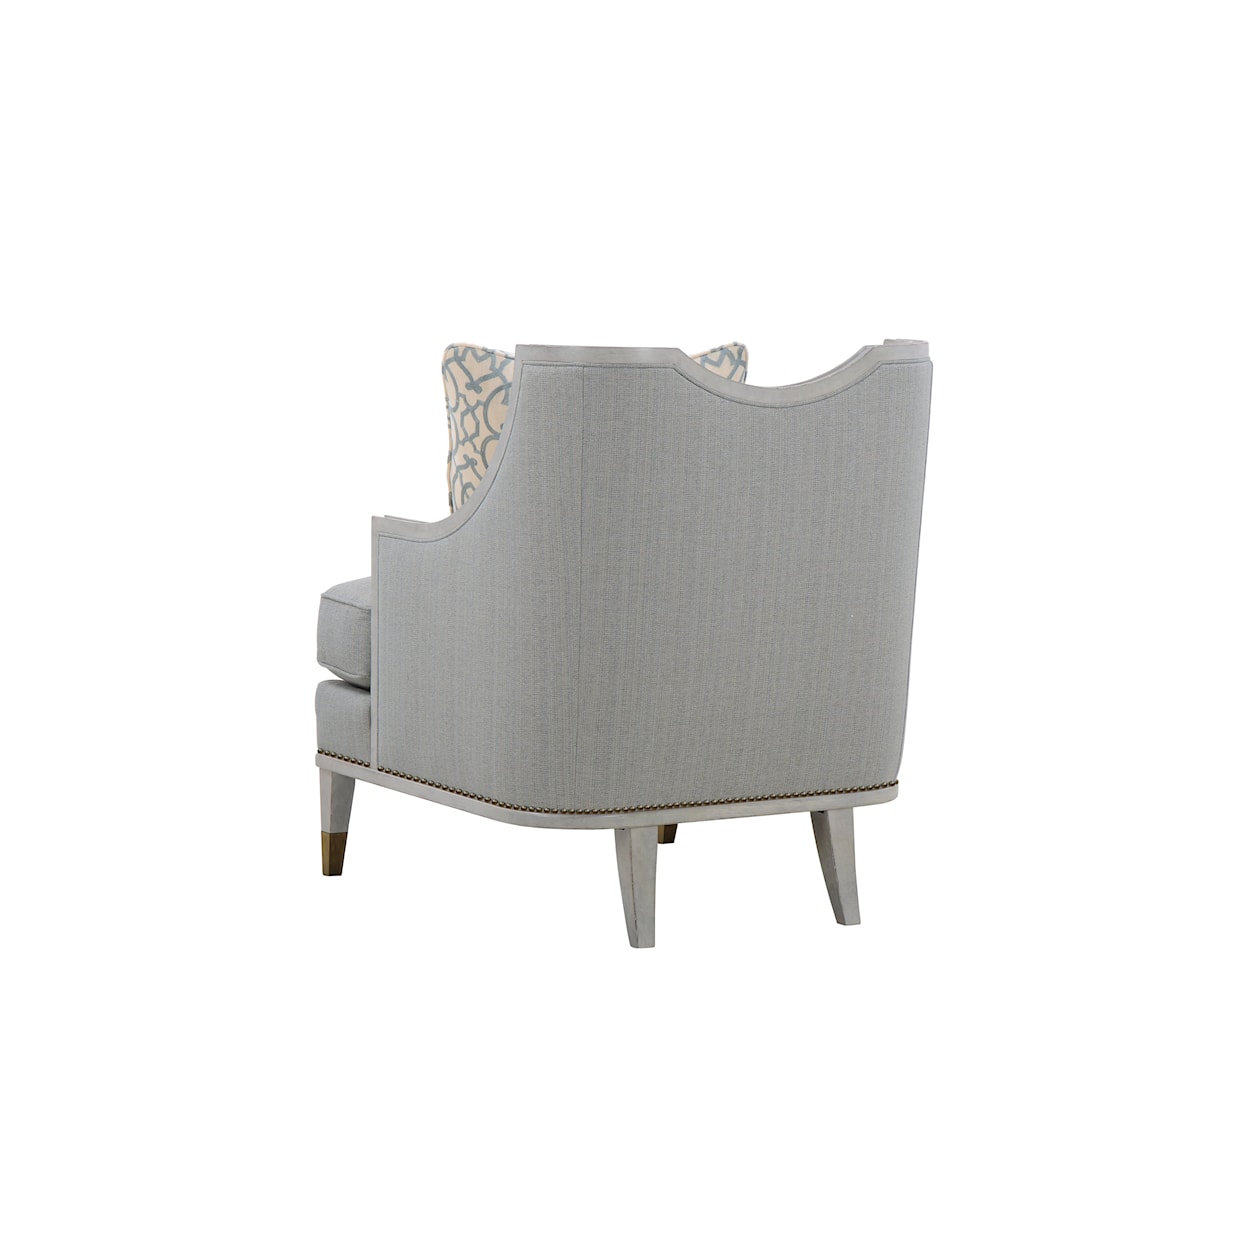 A.R.T. Furniture Inc 161 - Intrigue Accent Chair